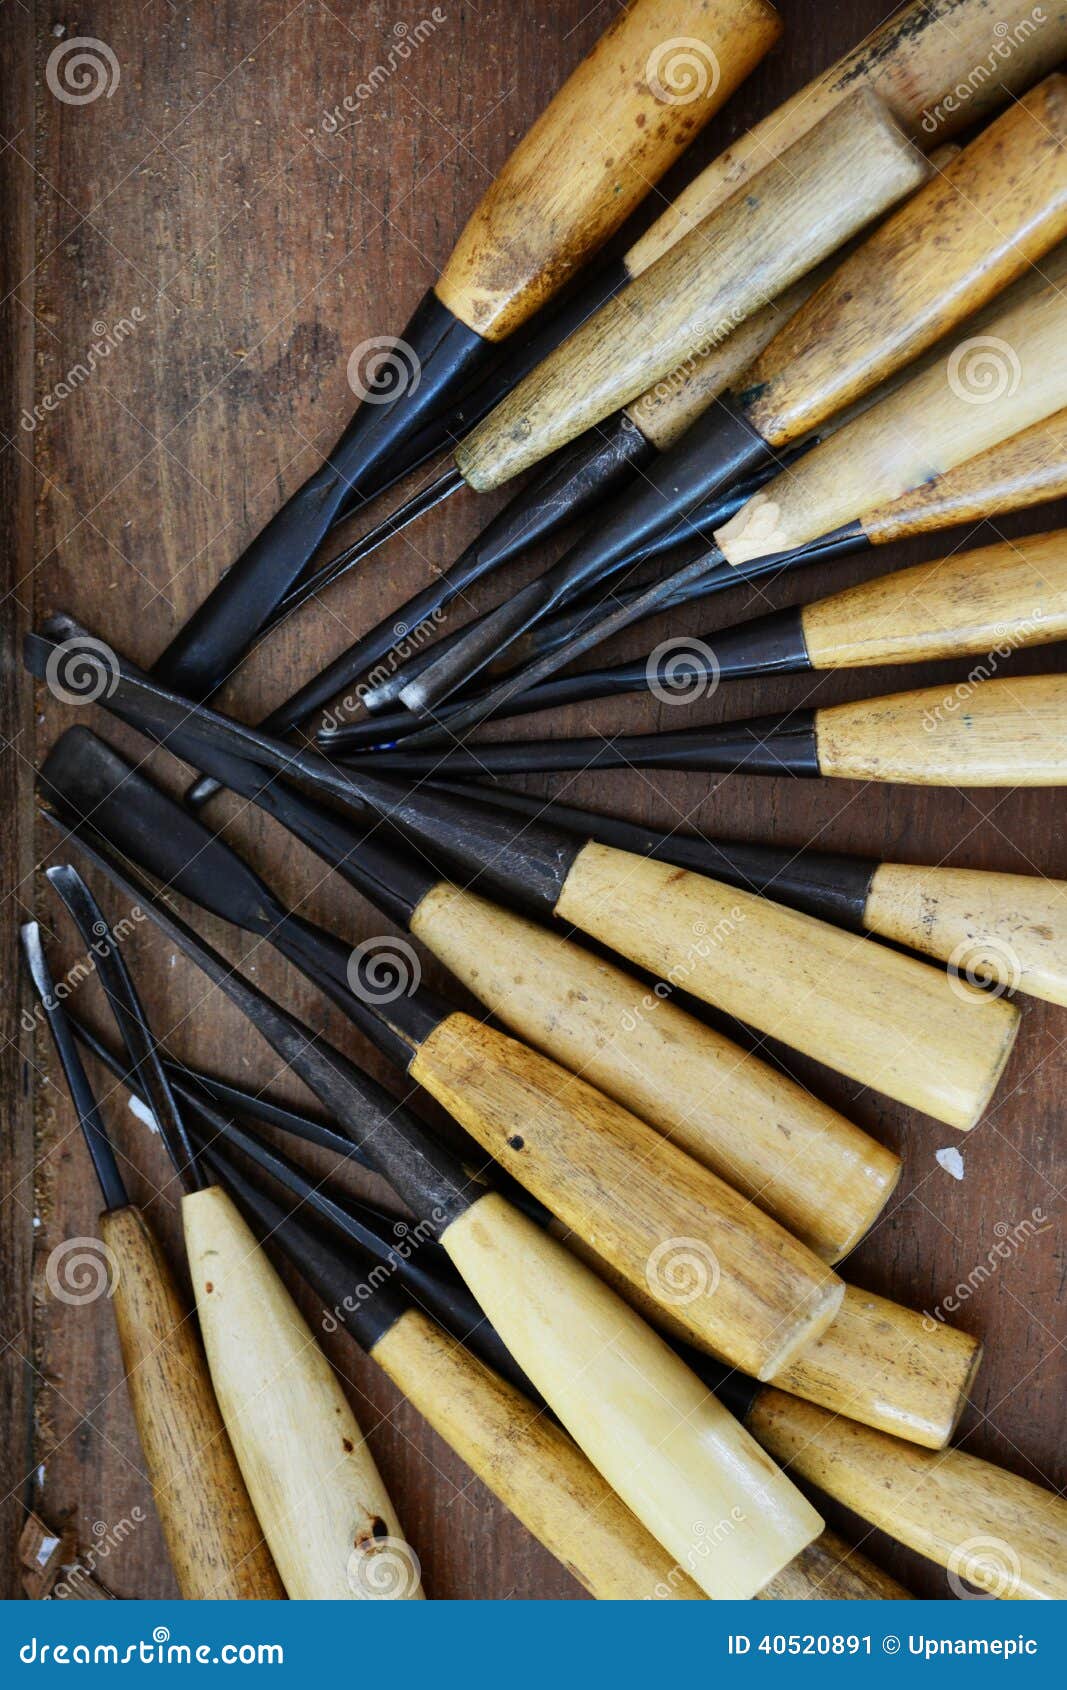 70+ Thousand Carving Tools Royalty-Free Images, Stock Photos